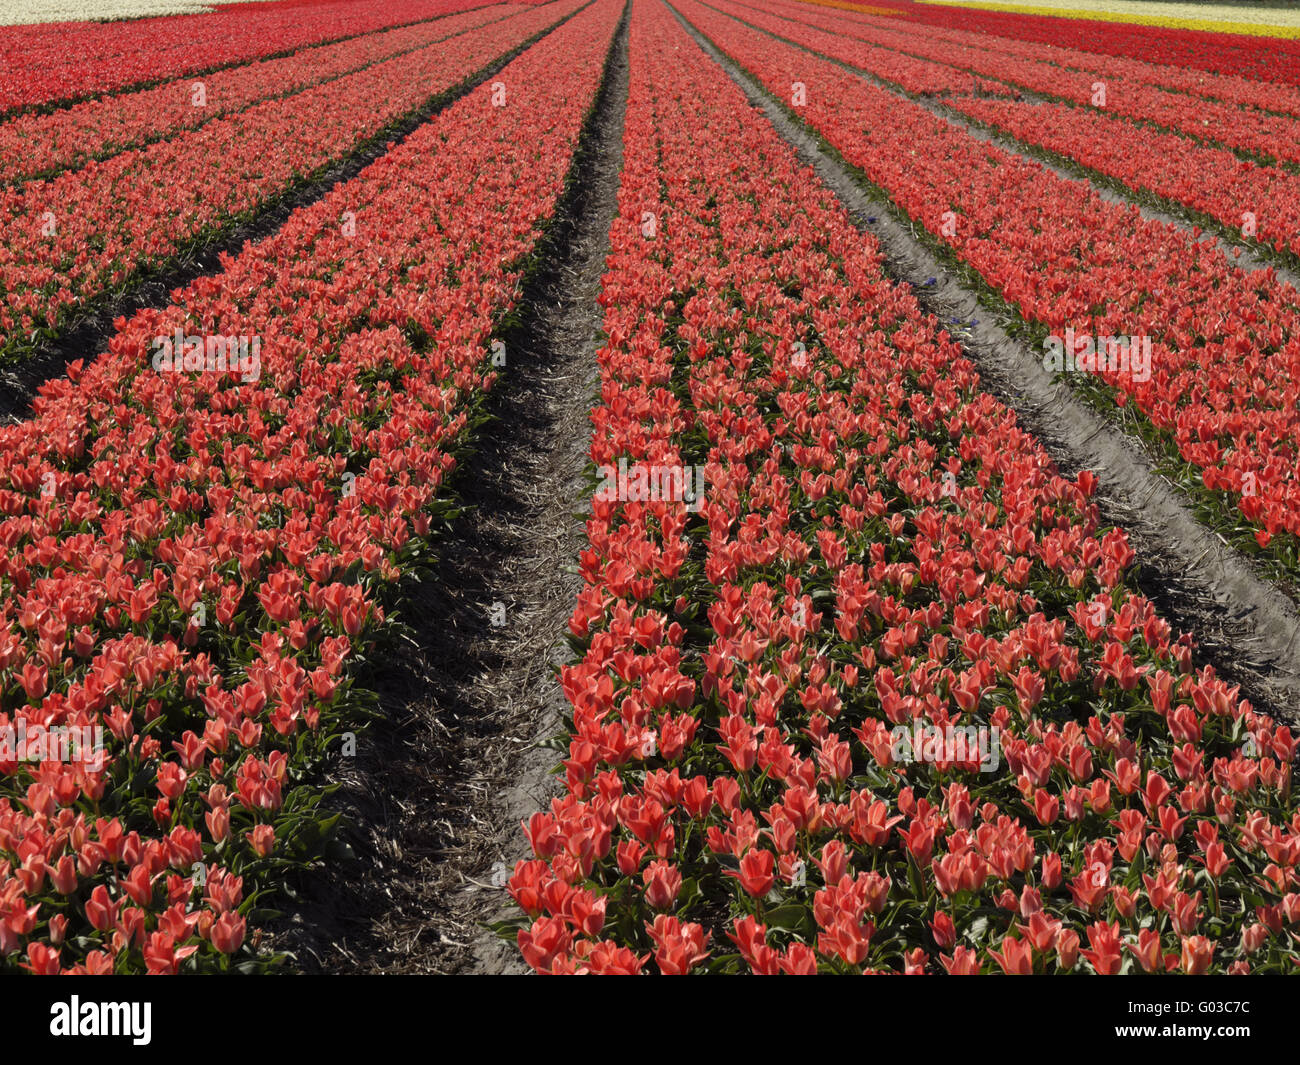 Tulip field near Lisse, South Holland, Netherlands Stock Photo